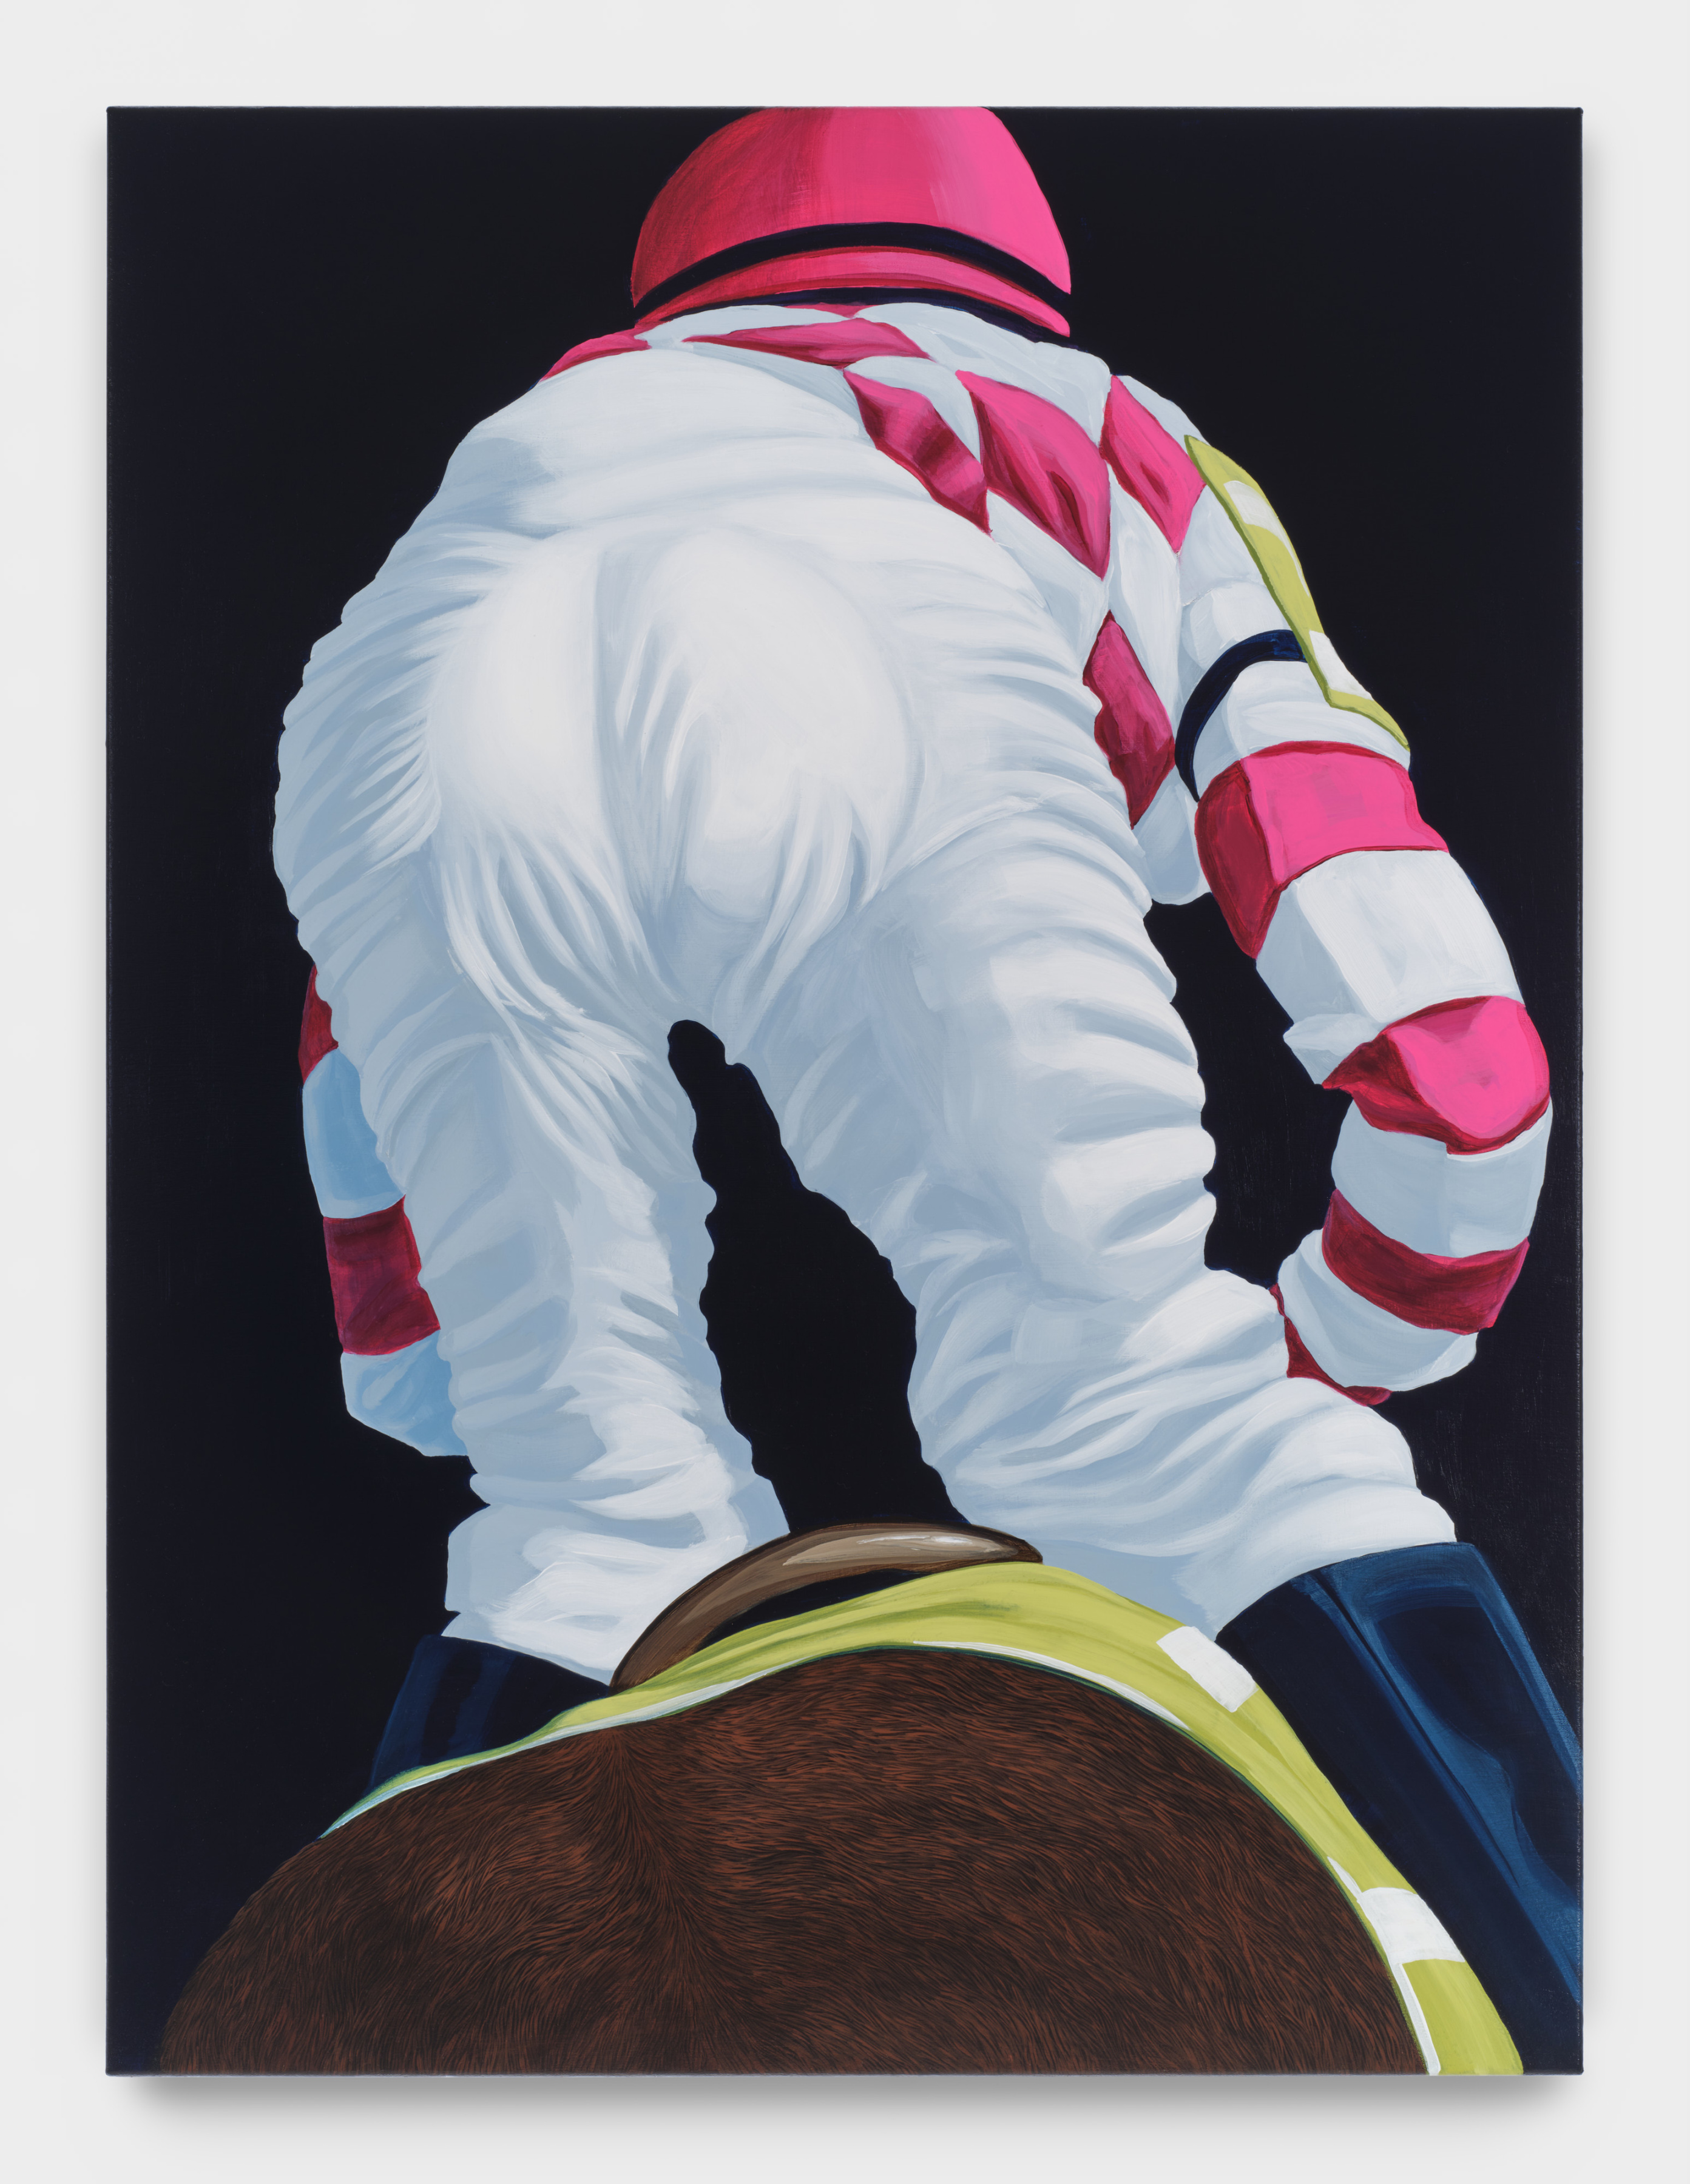 A painting depicting the rear end of a horse and jockey wearing white and pink argyle silks in racing position against a black background.